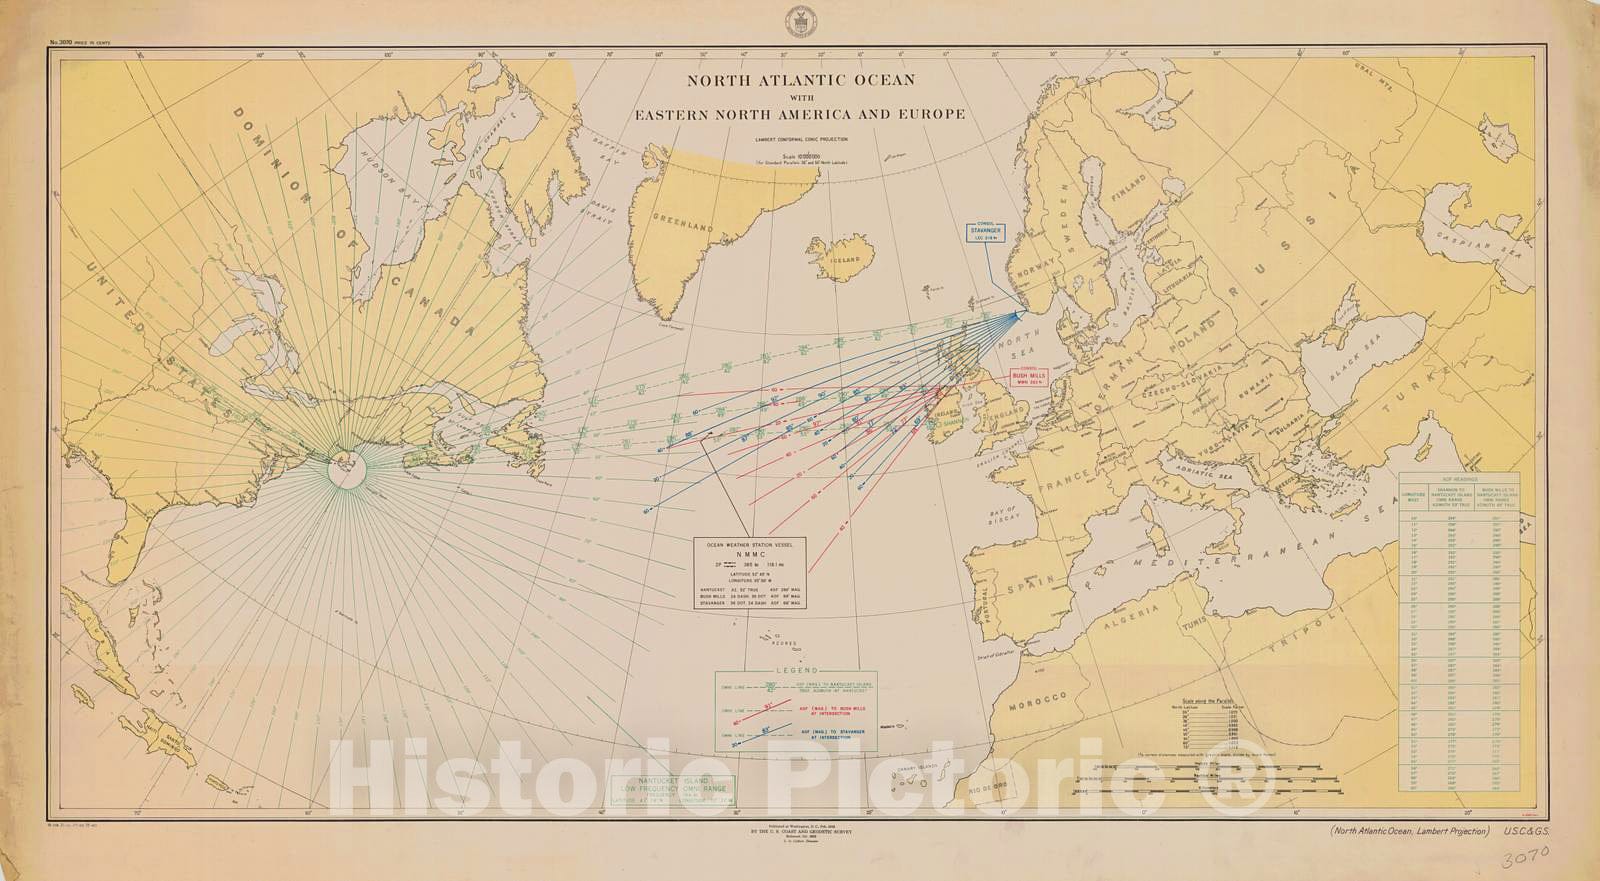 Historic Nautical Map - North Atlantic Ocean With Eastern North America And Europe, 1918 NOAA Cartographic - Vintage Wall Art